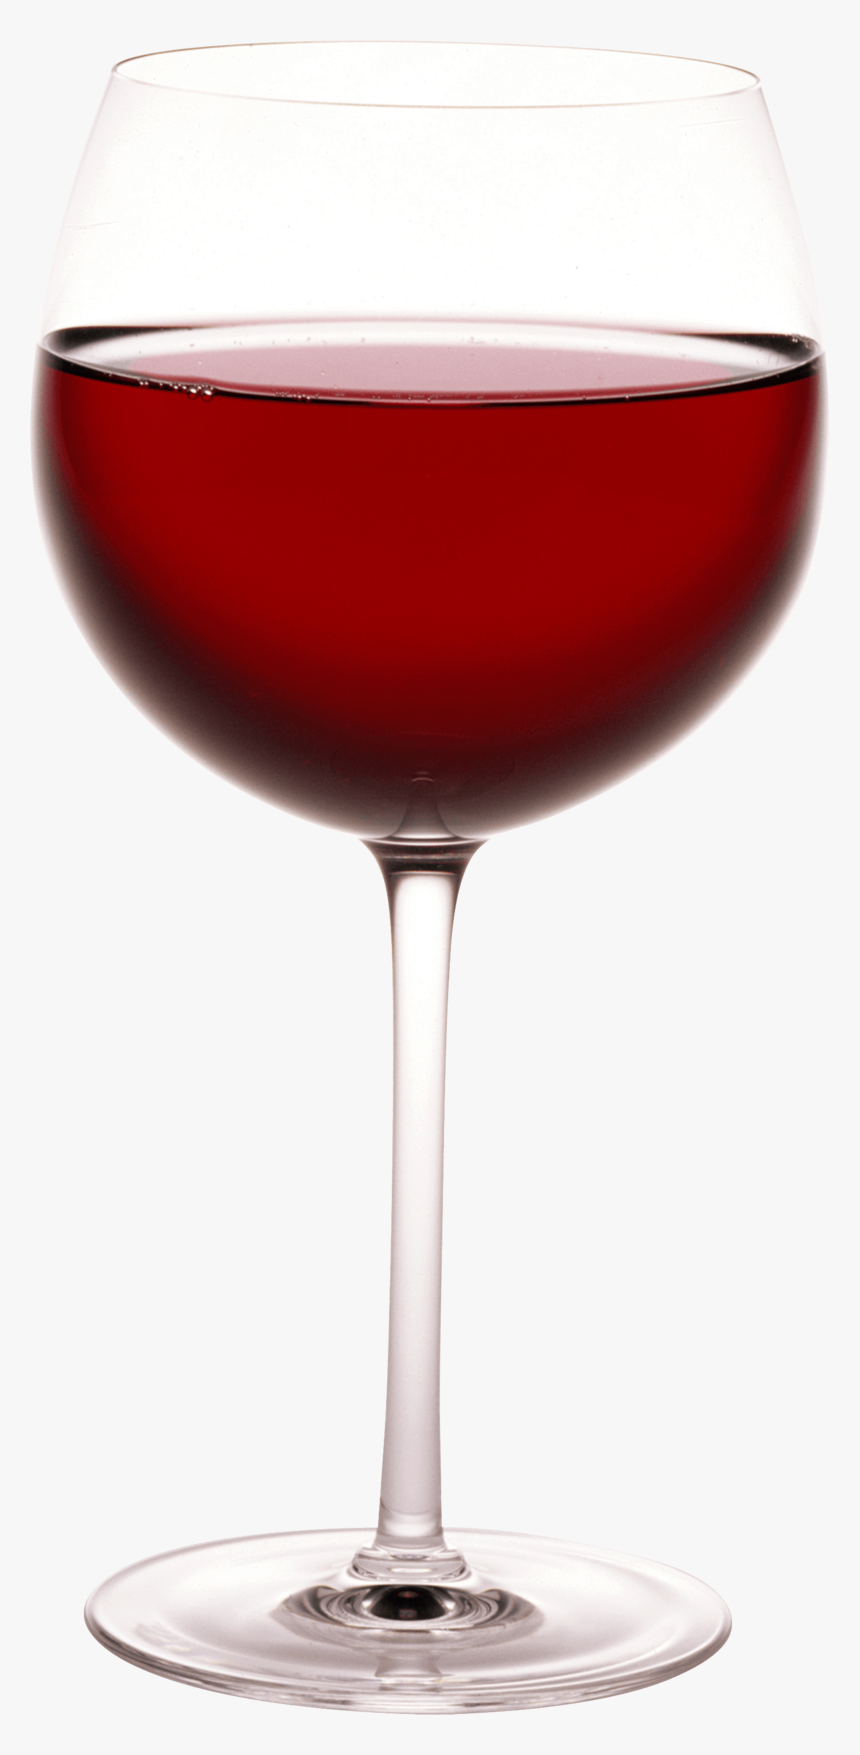 Glass Png Image - Red Wine Glass Png, Transparent Png, Free Download